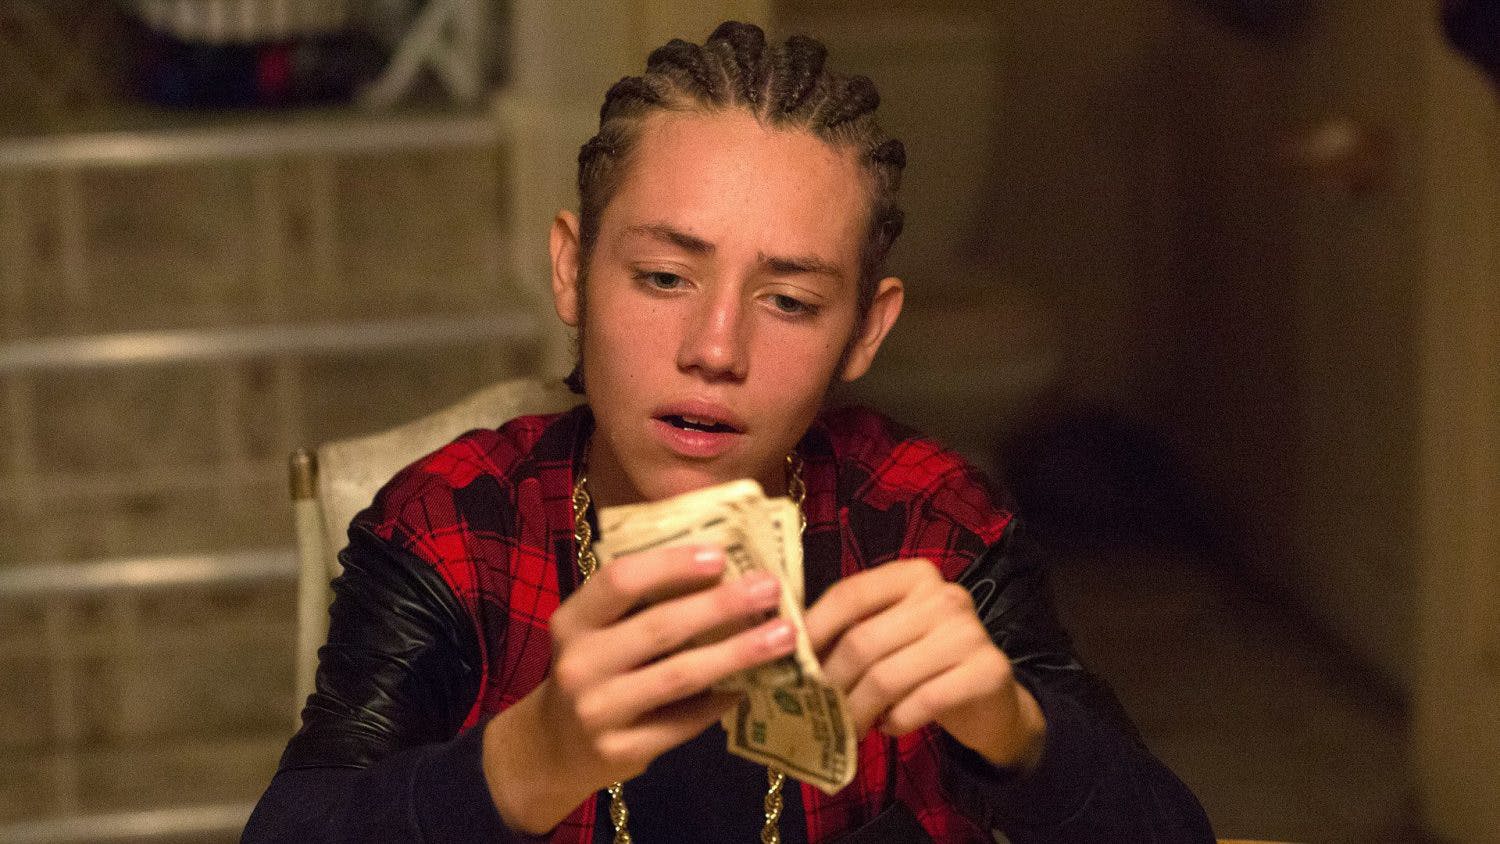 Shameless star Ethan Cutkosky was arrested for smoking weed and driving and gets a DUI